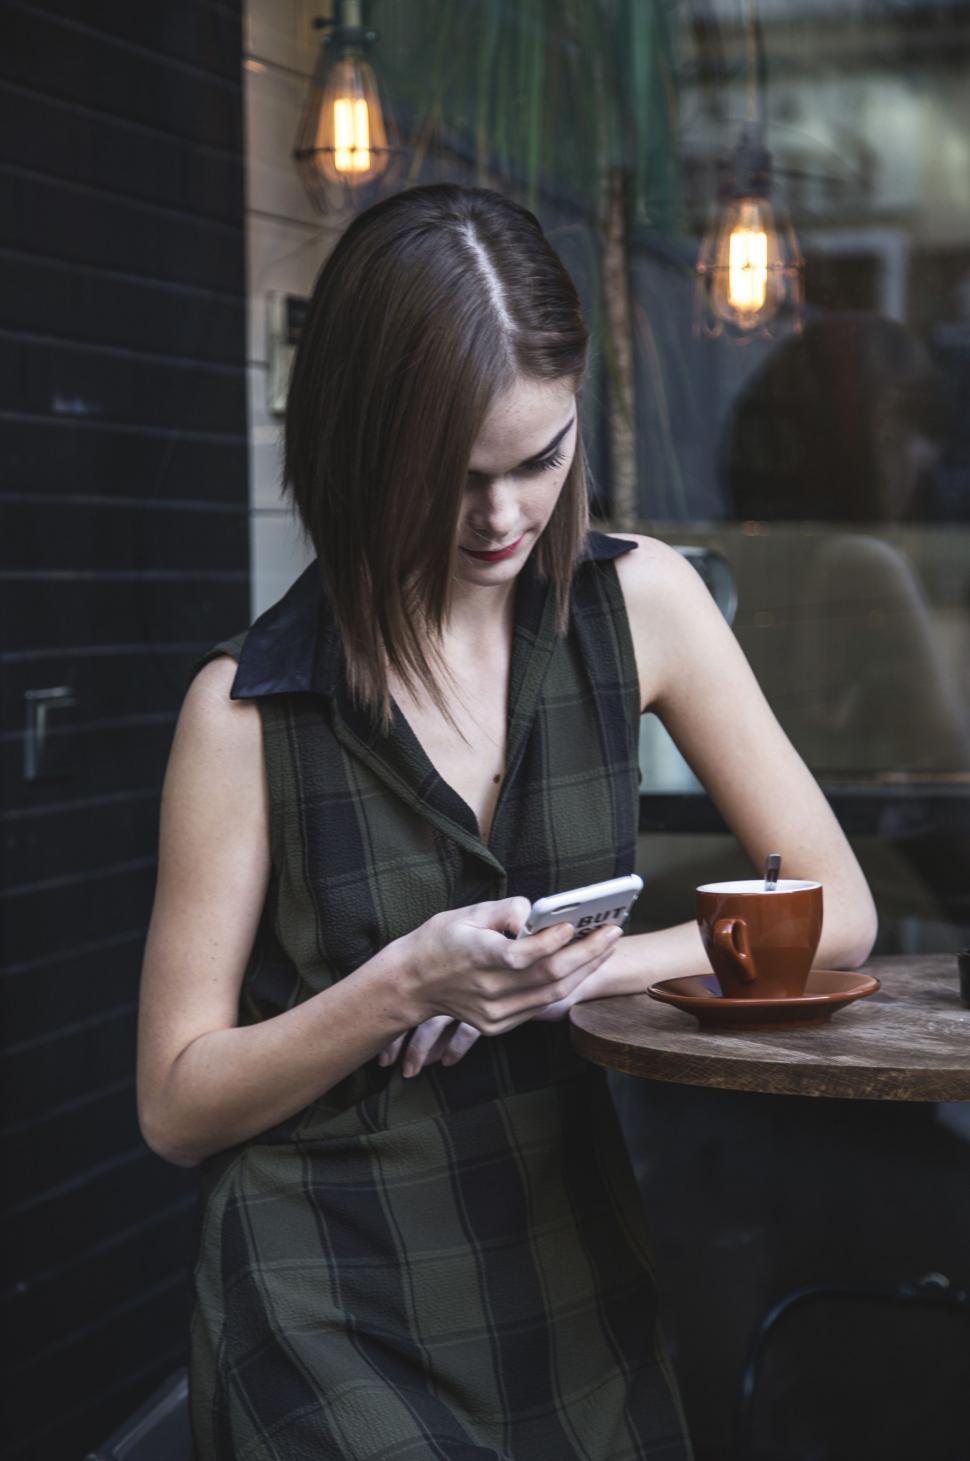 Free Image of Woman Sitting at Table Looking at Cell Phone 